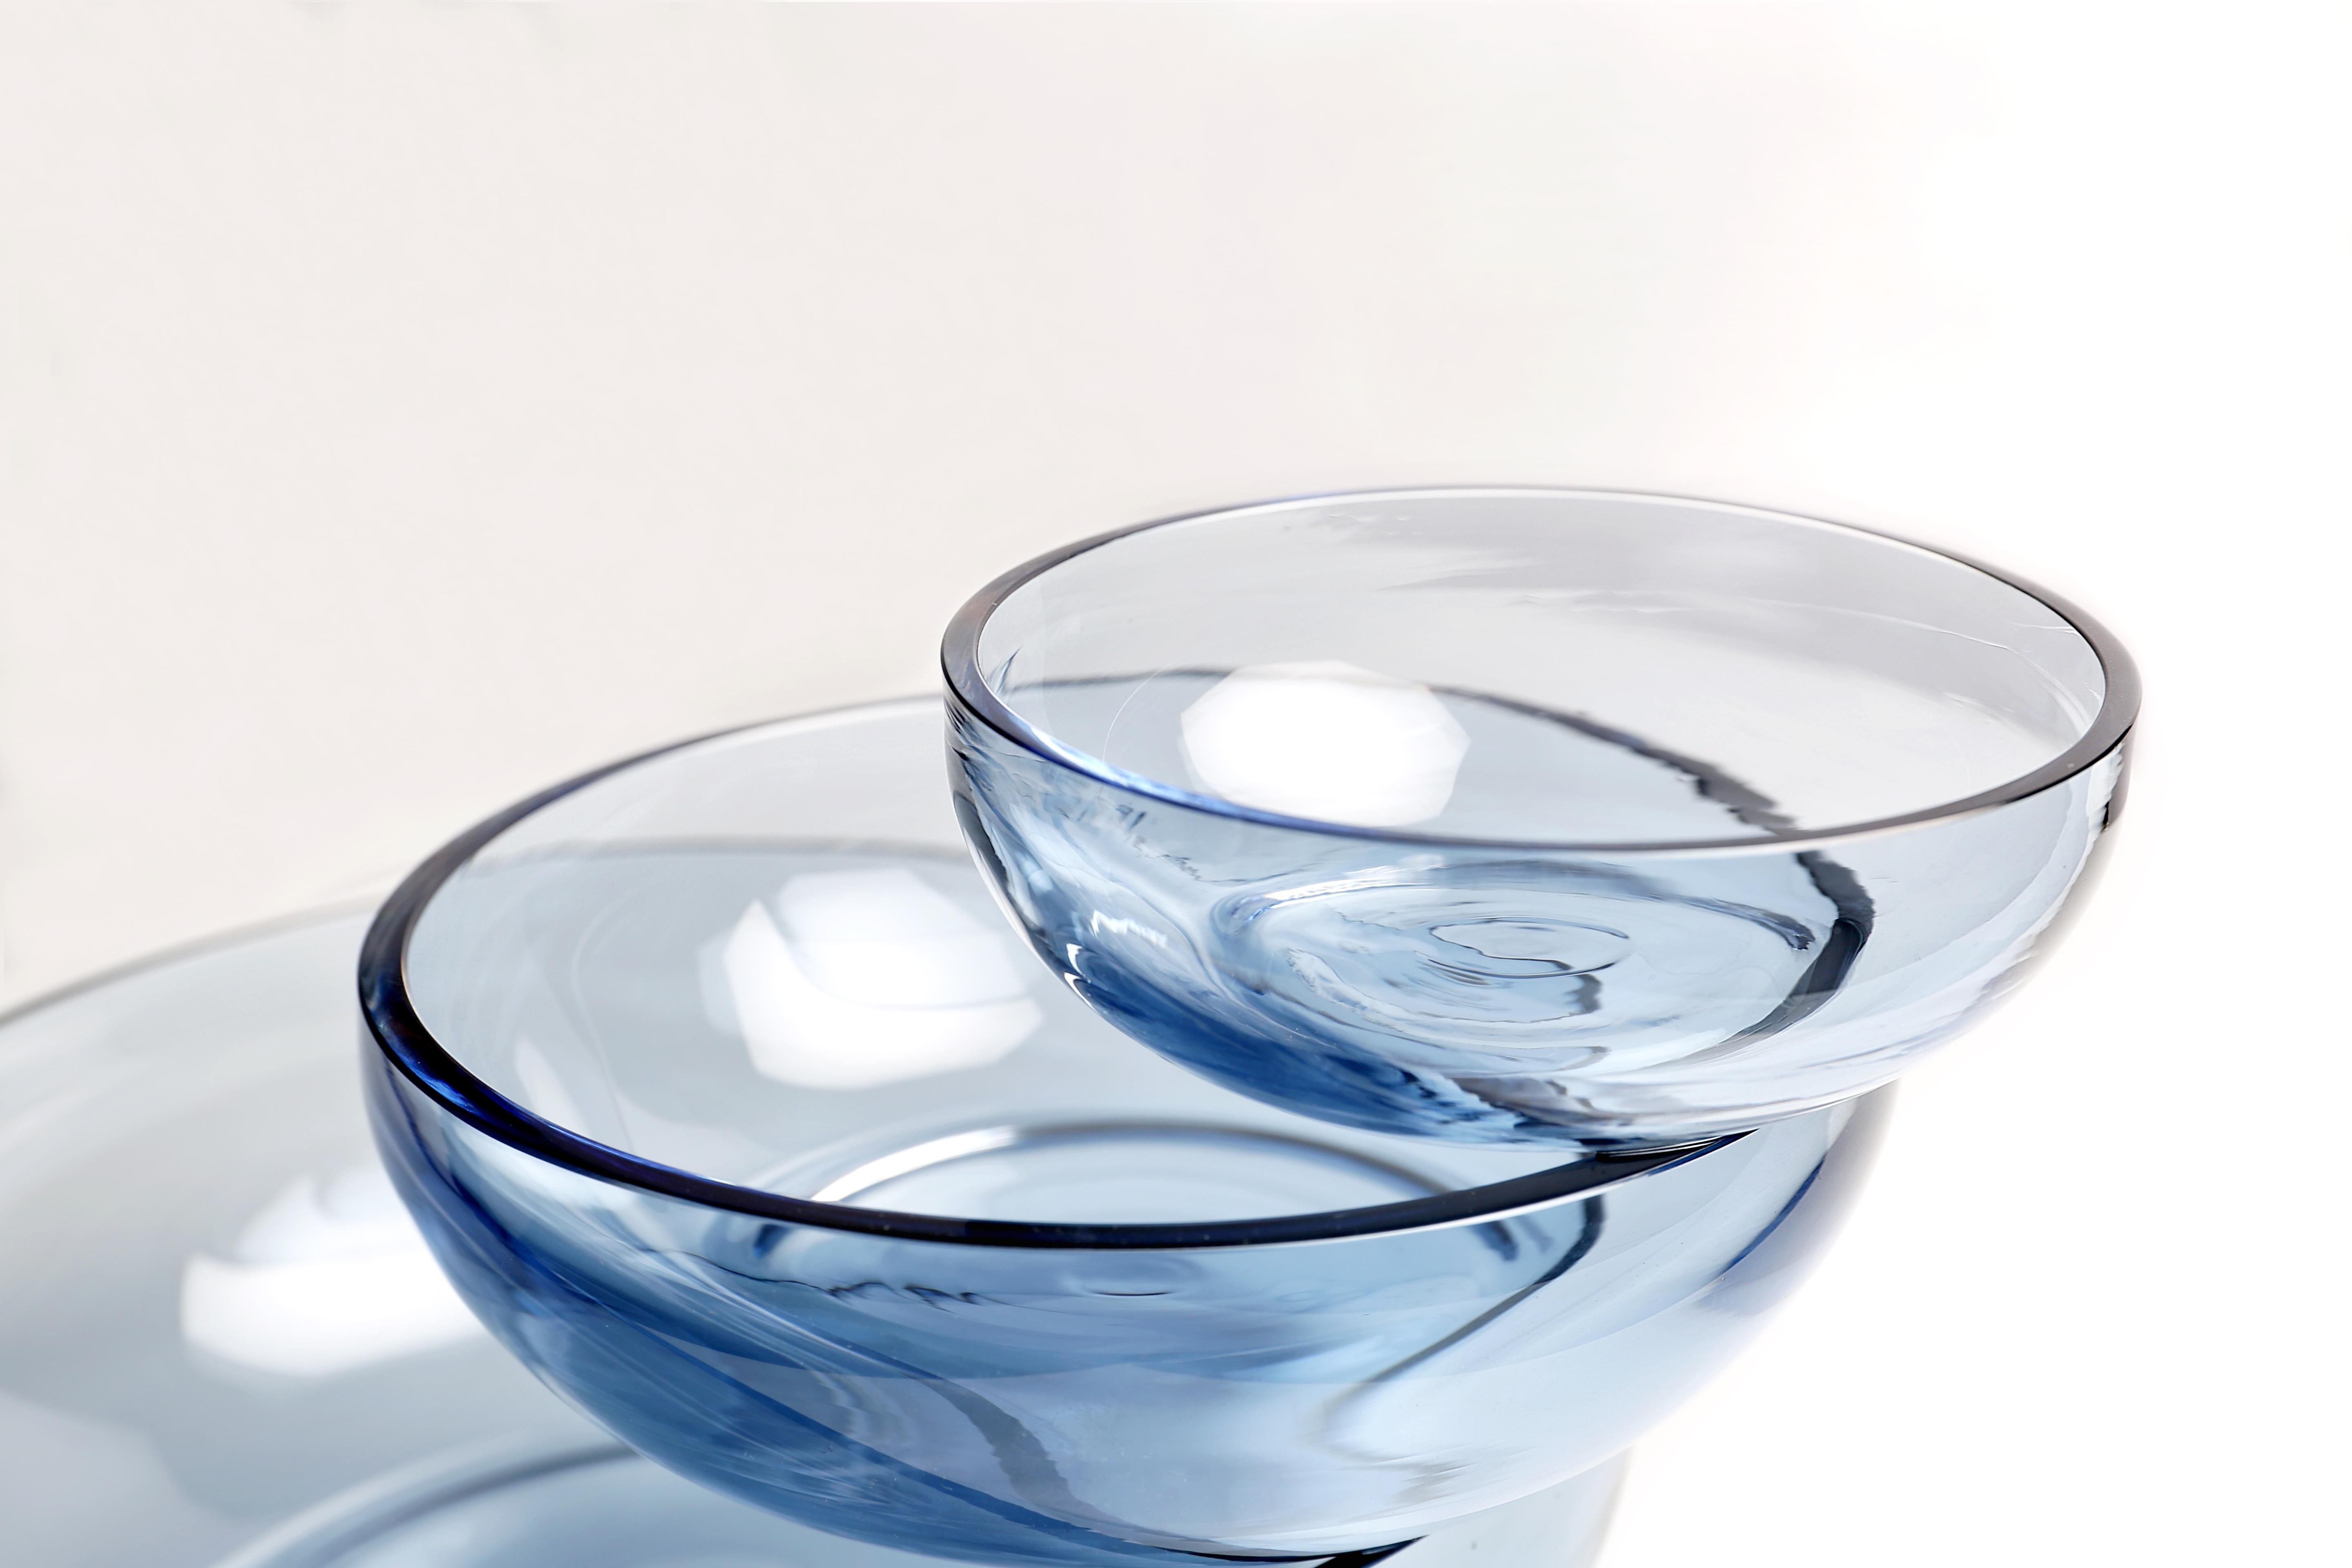 Contemporary Balancing Glass Sculptural Bowl from the Balance Collection by Joel Escalona